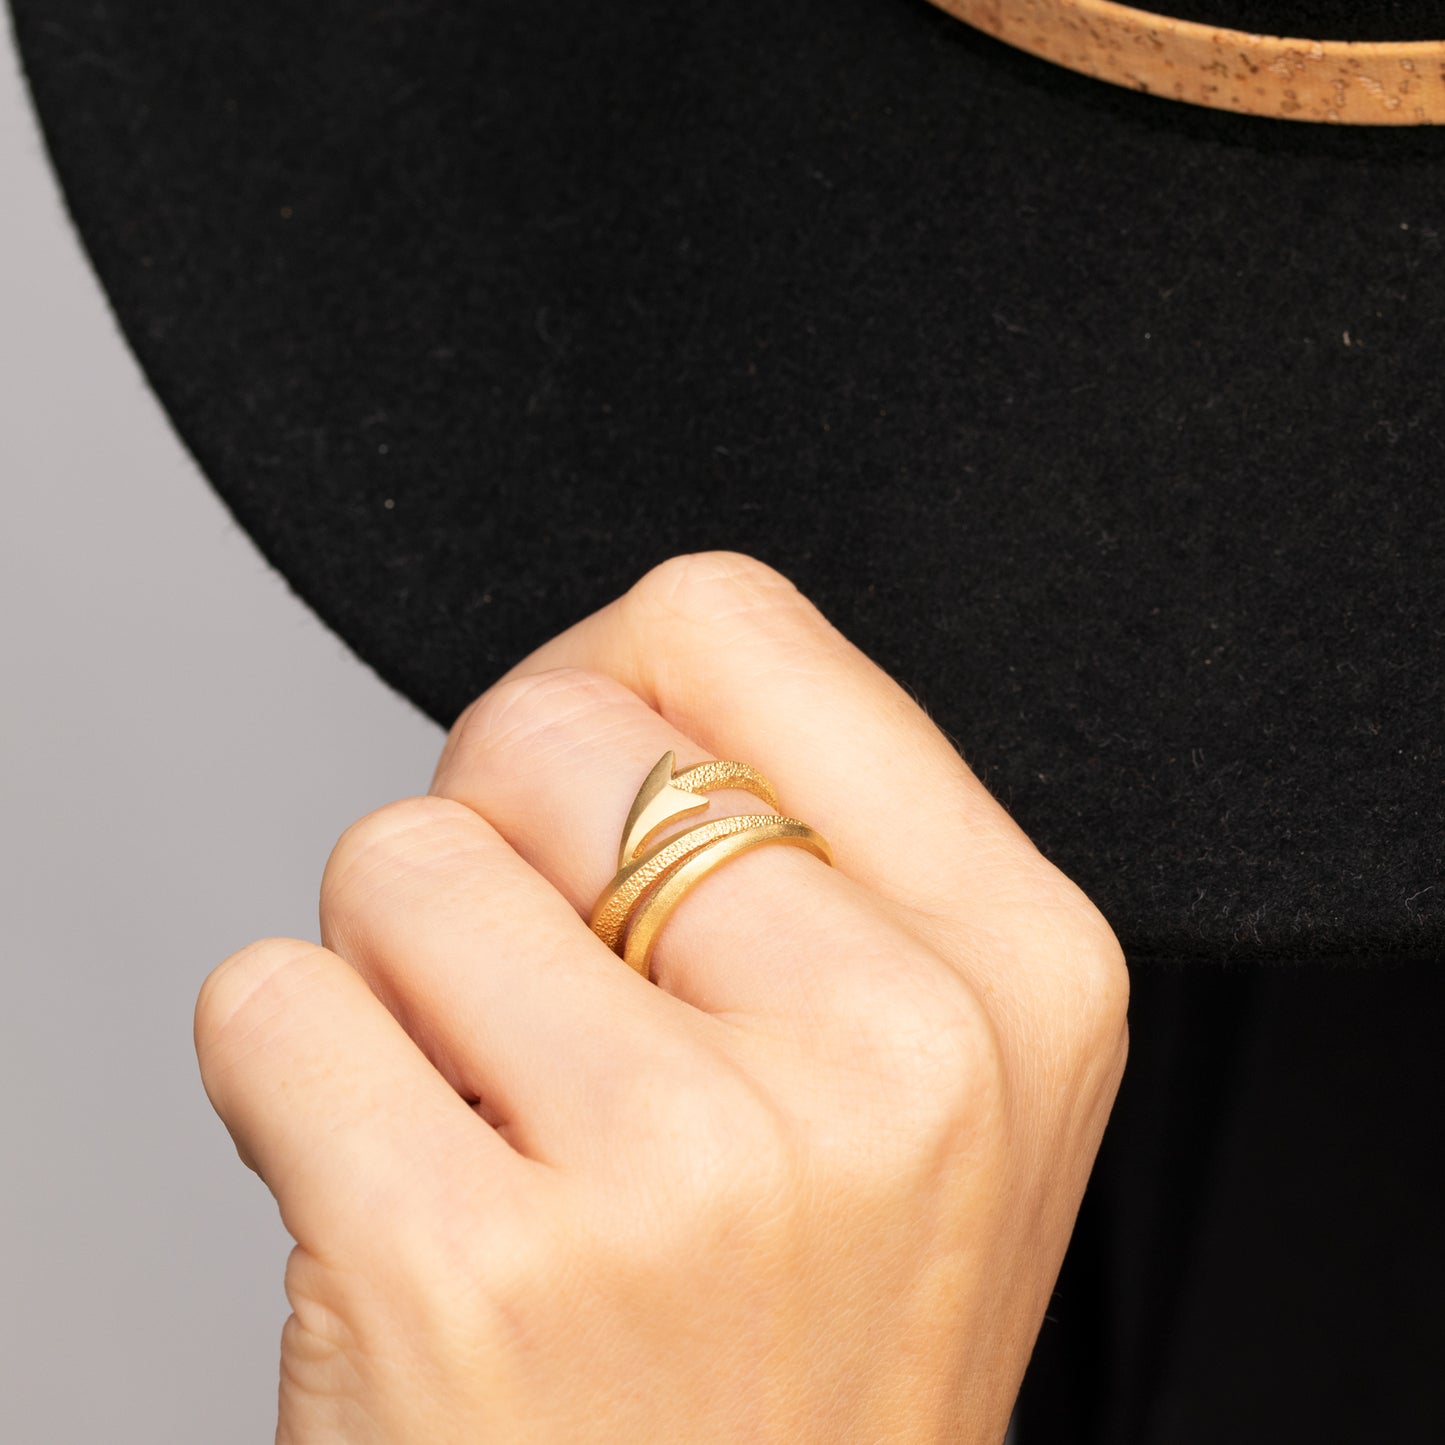 Orme-Brown Contemporary Fine Jewellery The Way Wide Band Alternative wedding ring Statement Ethical Sustainable Luxury Recycled Gold Textured